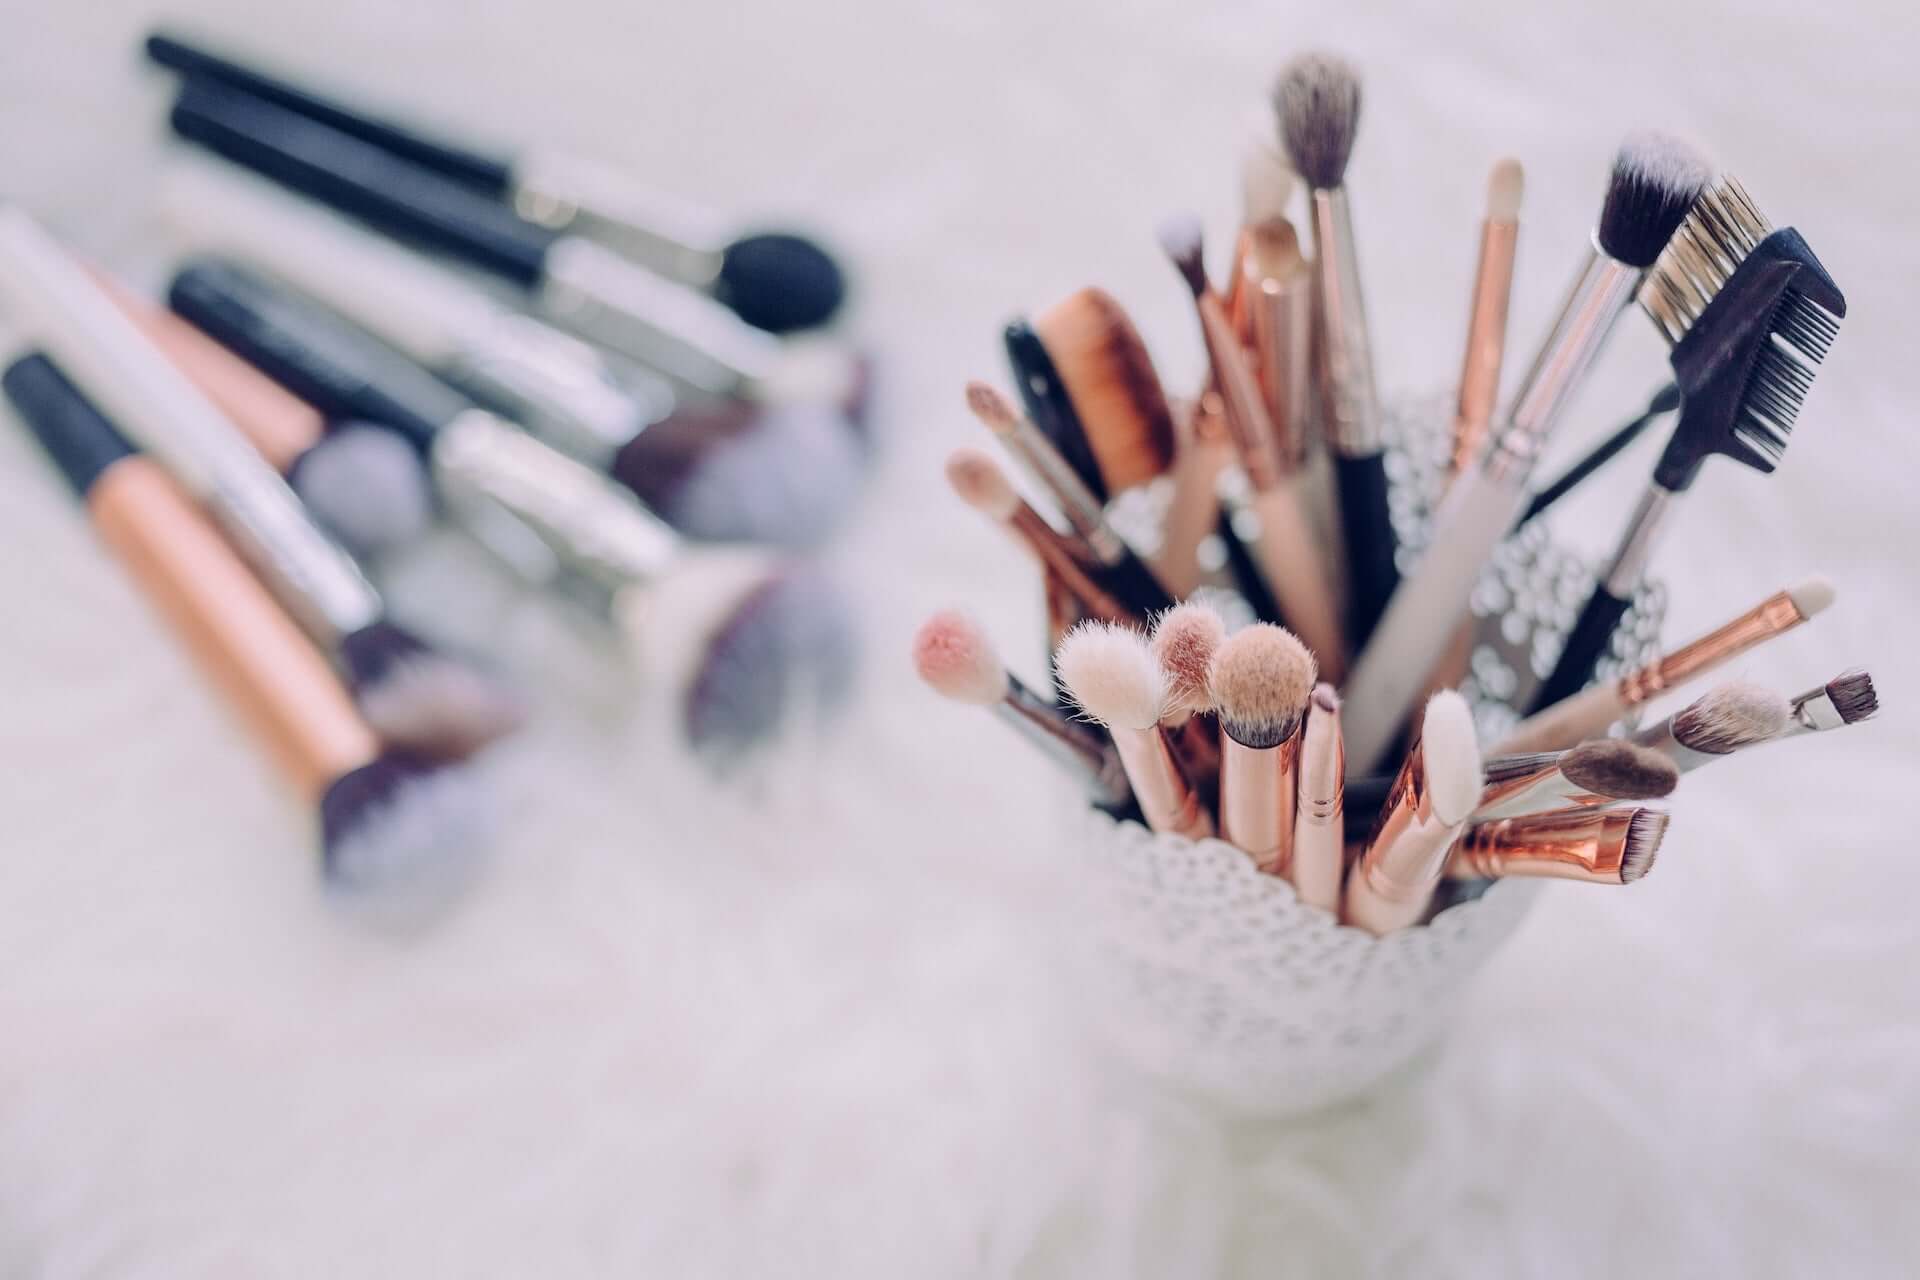 Various makeup brushes in a standing cup and laid out on a counter.